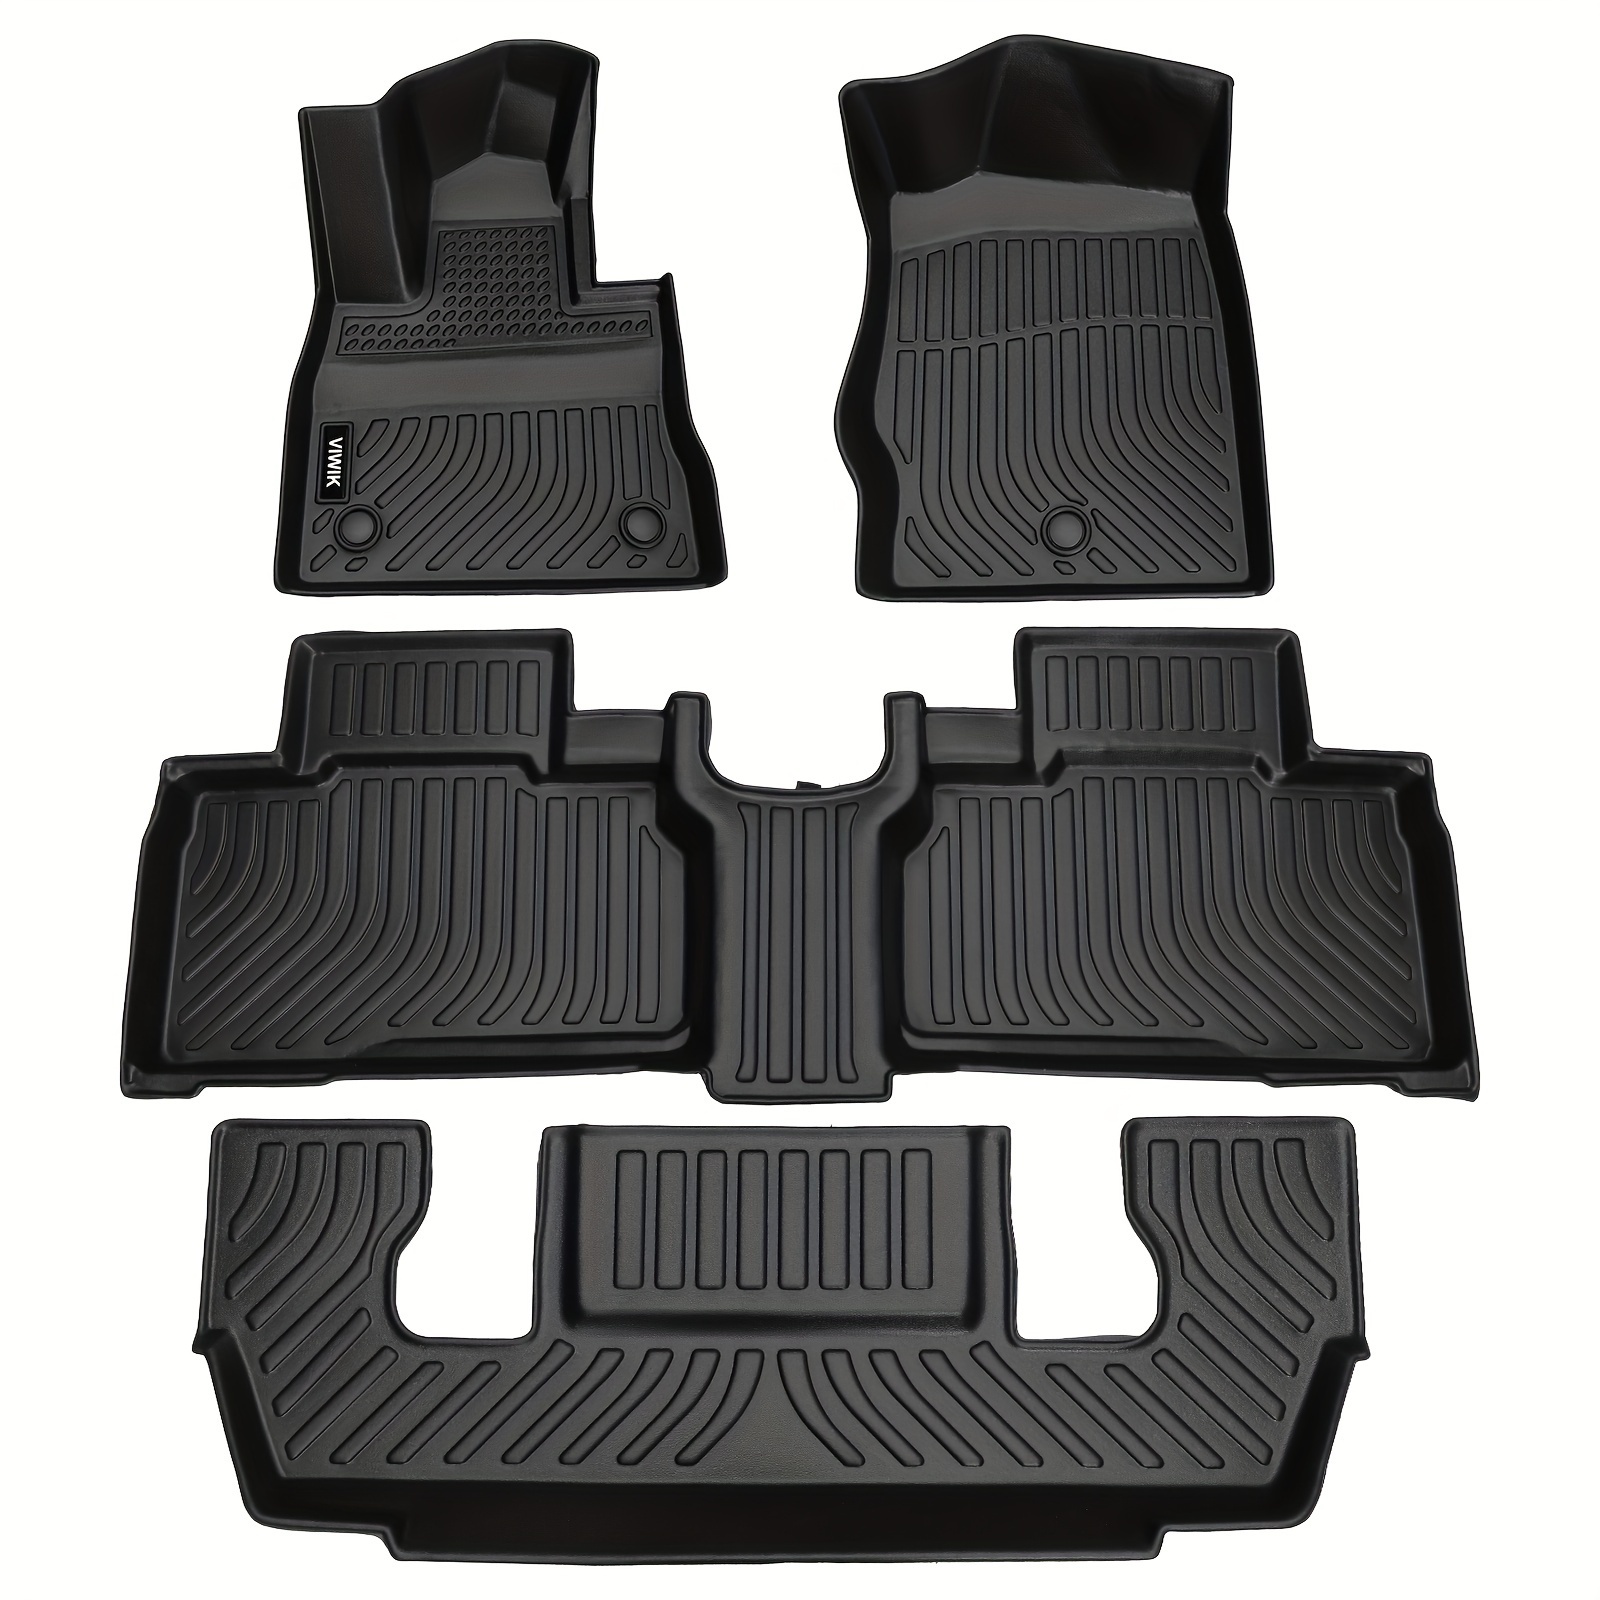 

Floor Mats For 2020-2024 6 Seat, Car Mats All Weather Protection Custom Floor Liners For Full Set 1st/2nd/3rd Row Front & Rear Tpe Black Non-slip Odorless